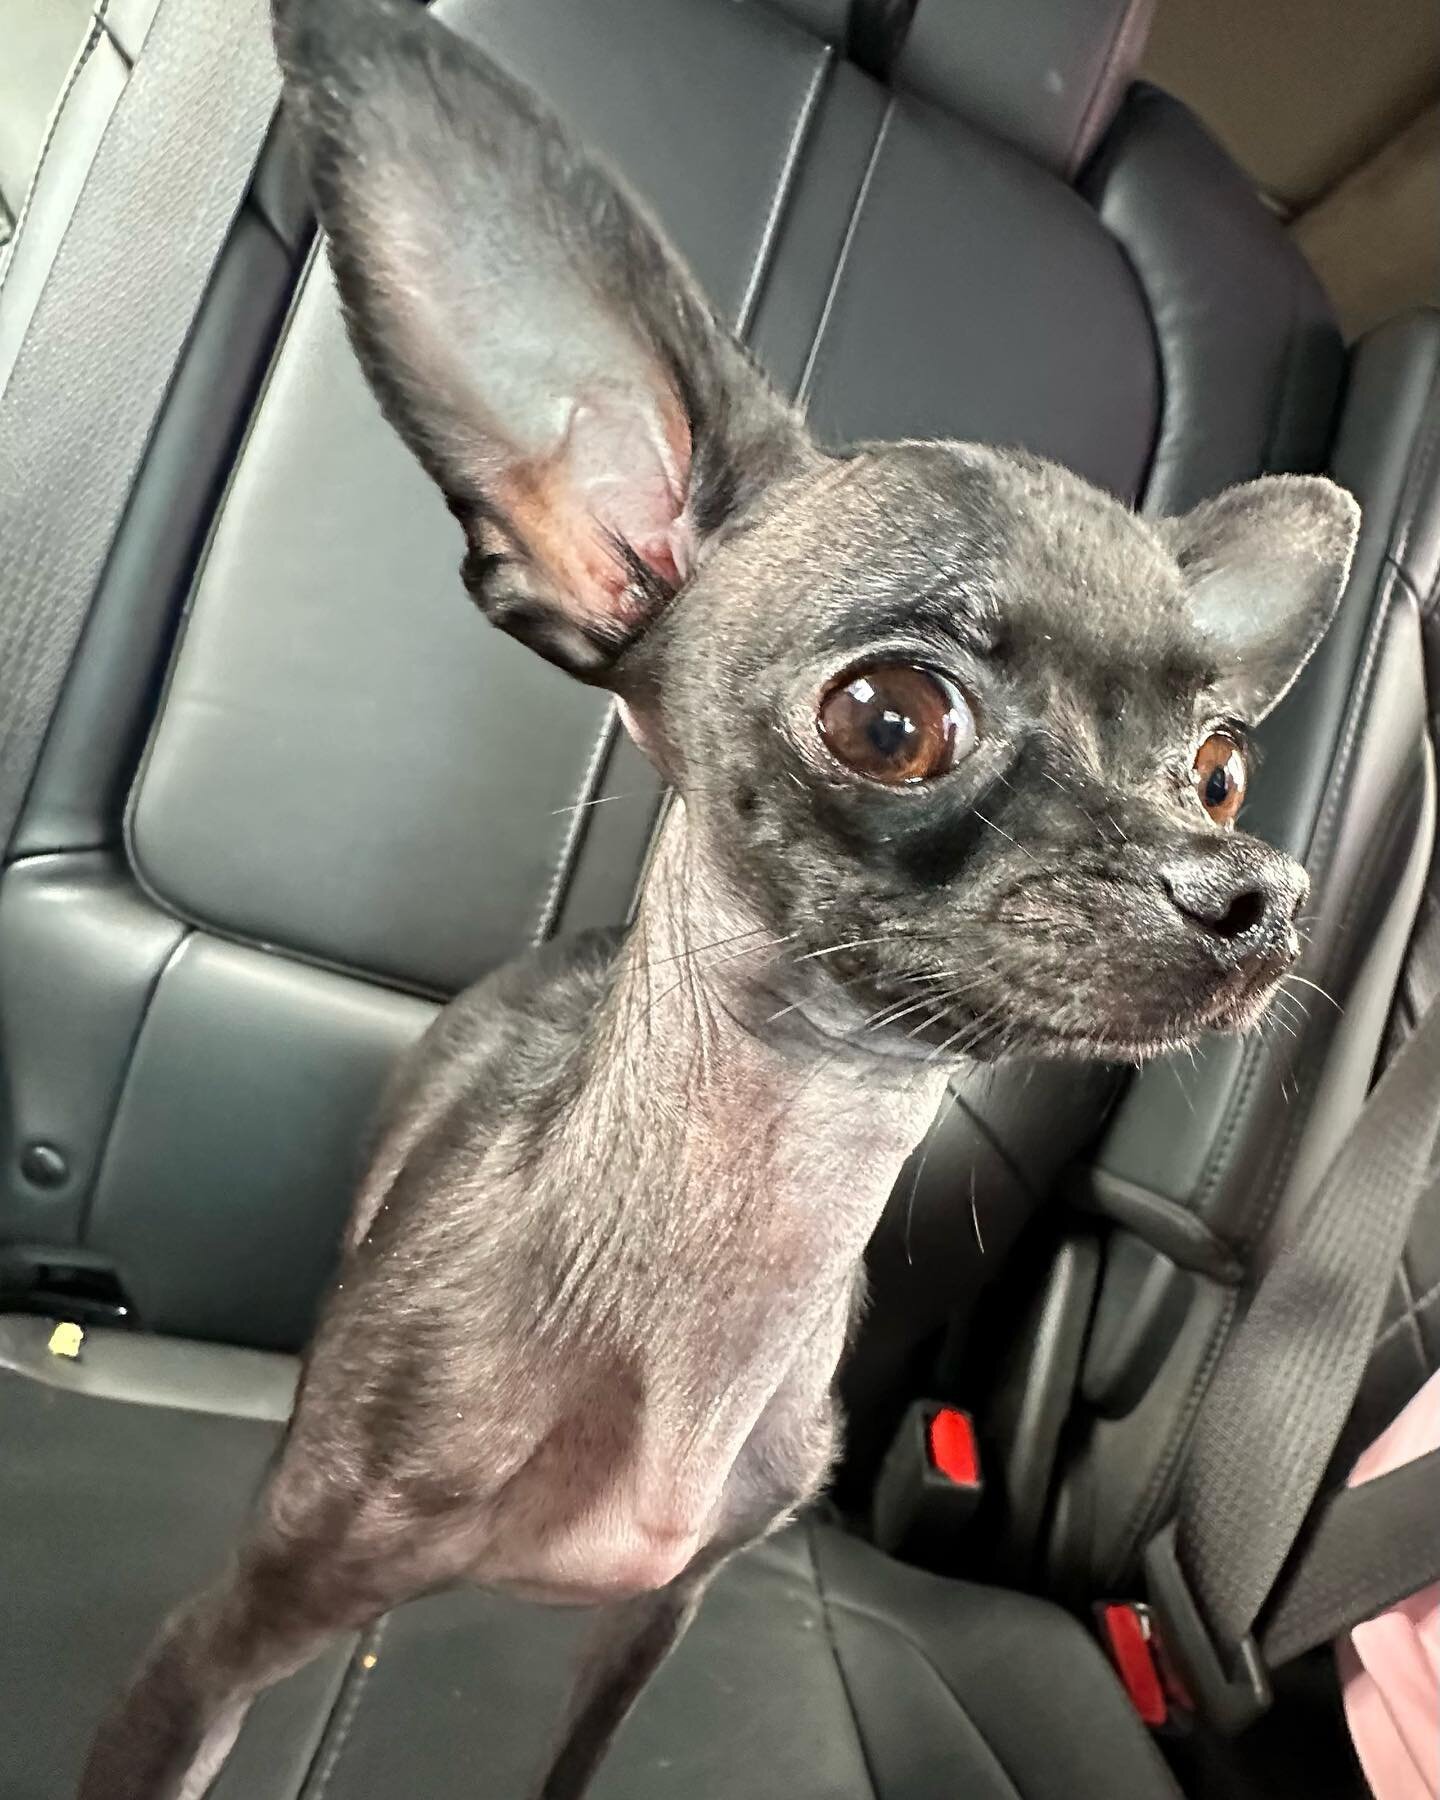 Meet Shimi!!💜

&lsquo;Bite size Beauty&rsquo;

&ldquo;Good things come in small packages right? Doesn't get much smaller than this!&nbsp;

Shimi is a 2 pound, 3 year old teacup Chihuahua!

She can fit in a pocket, purse , or your arms and snuggle up